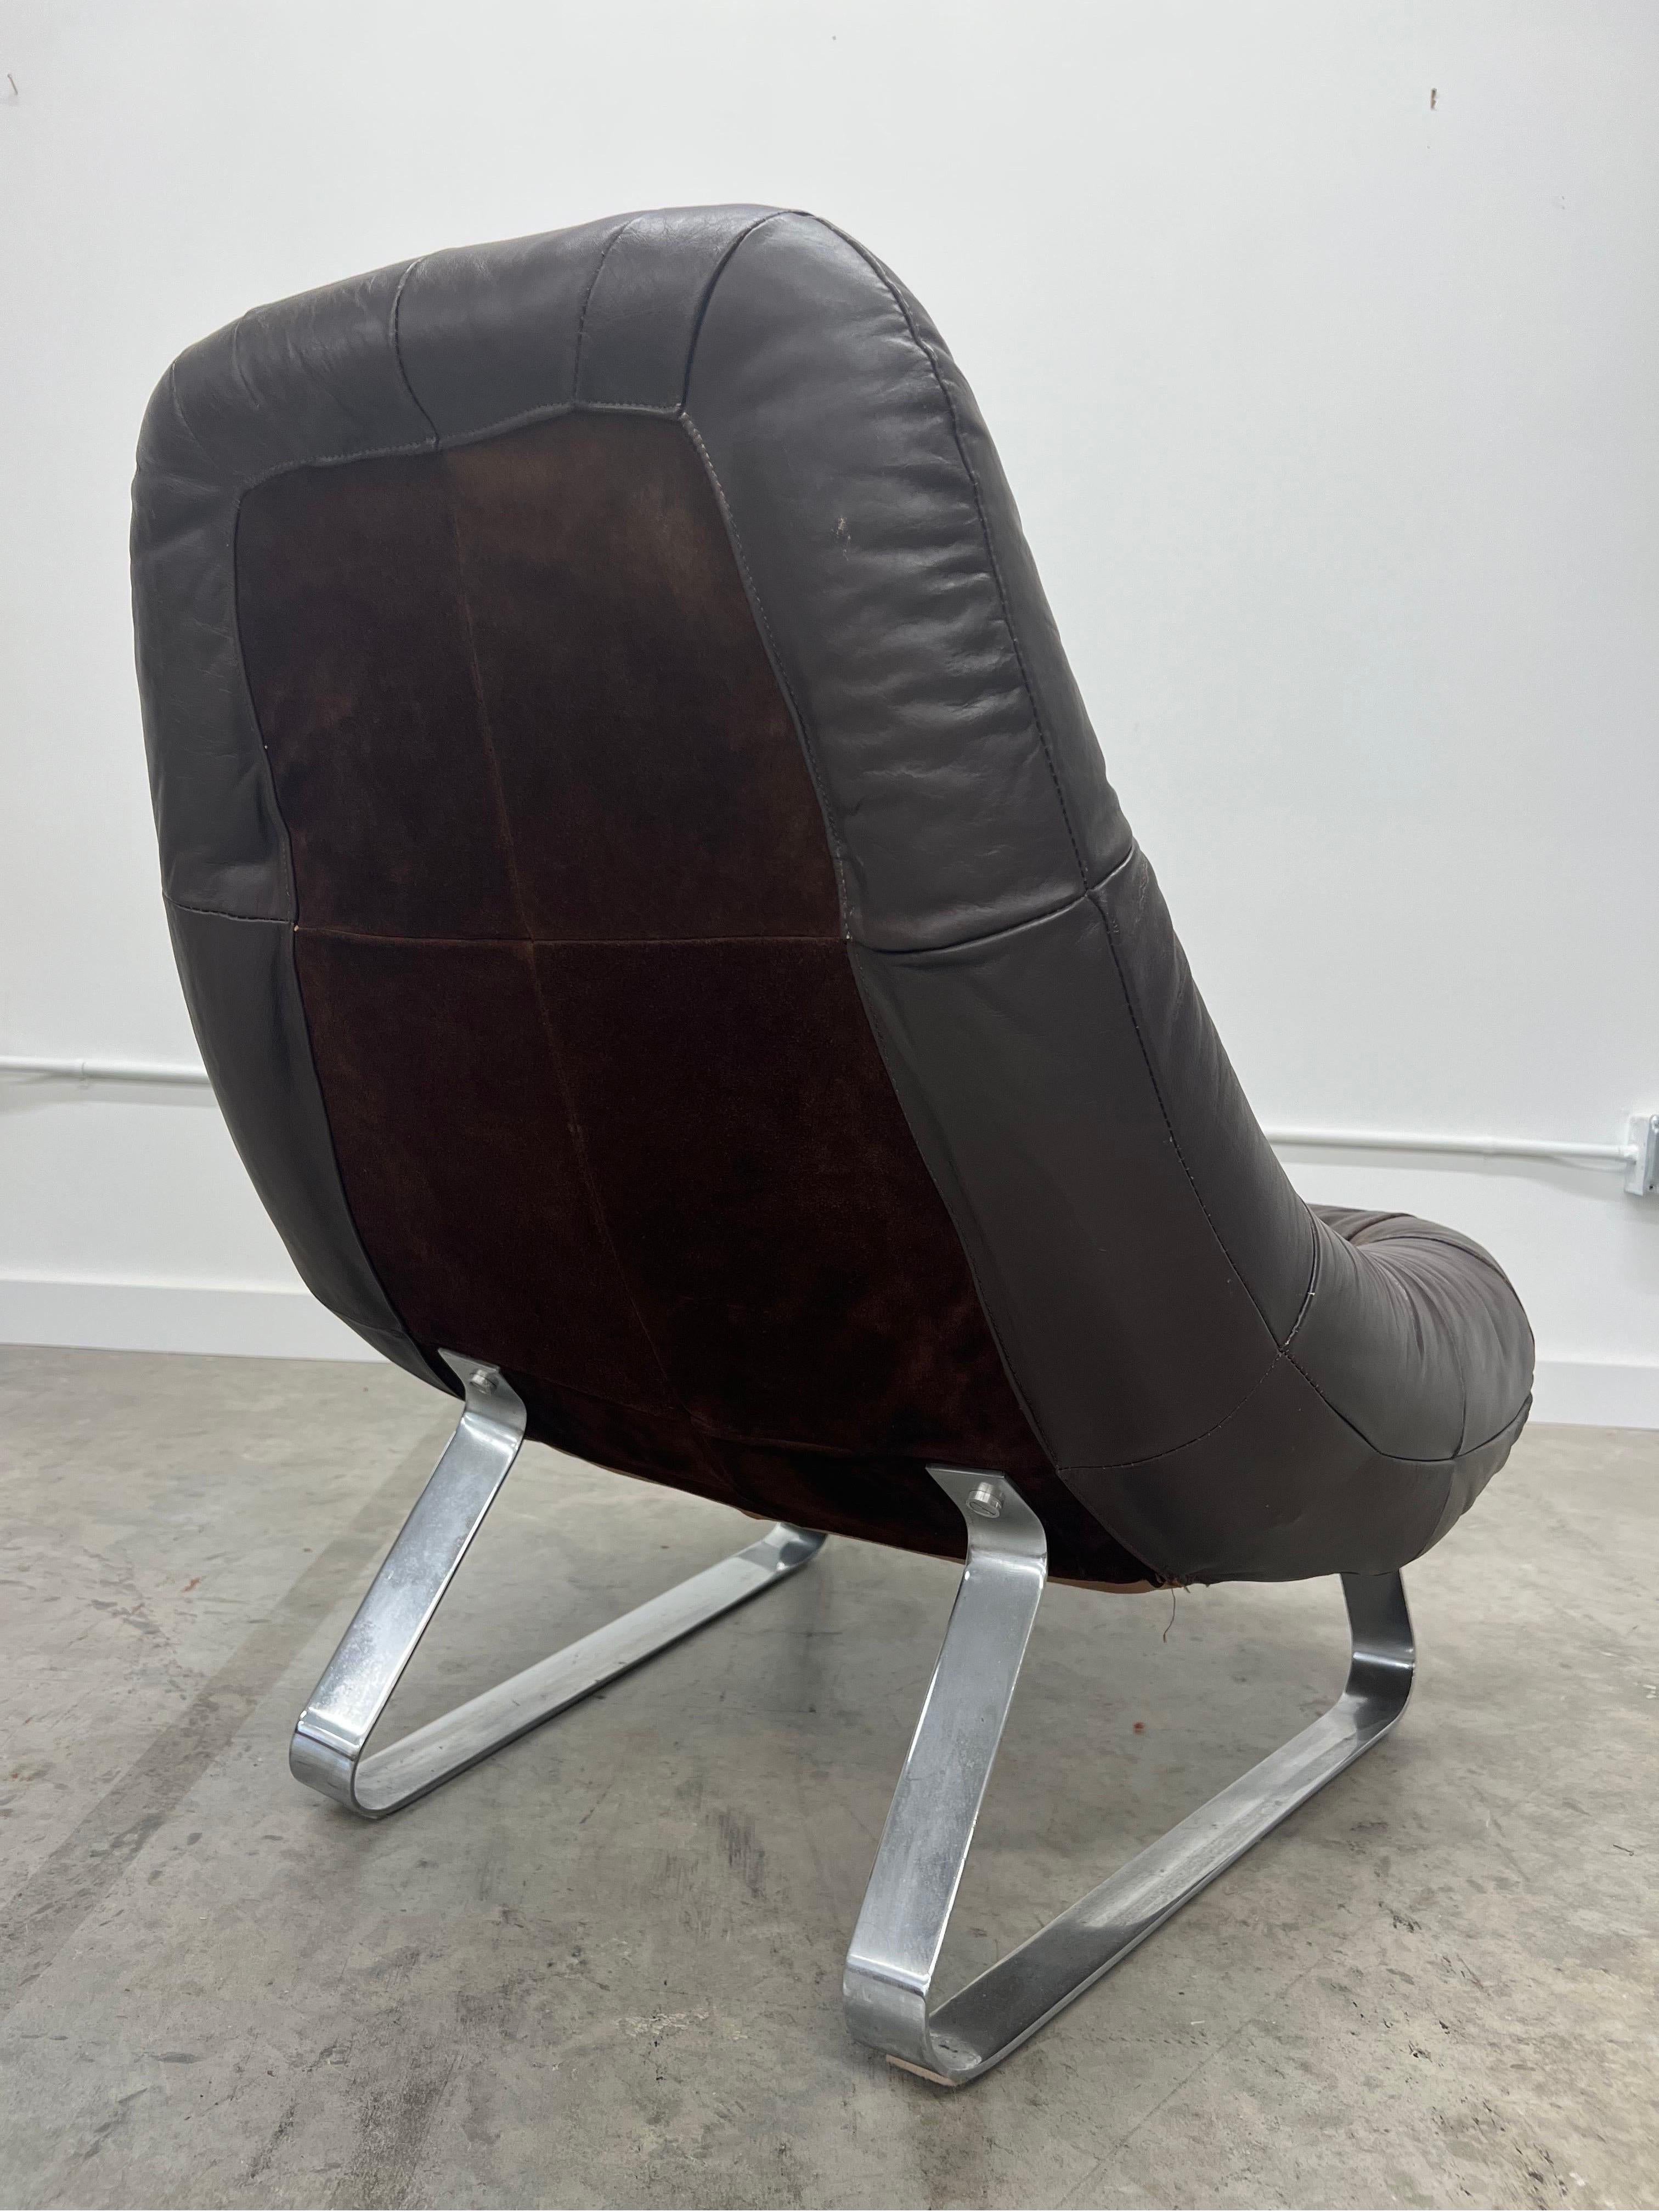 Leather Mid-Century Modern Percival Lafer “Earth Lounge” Chair